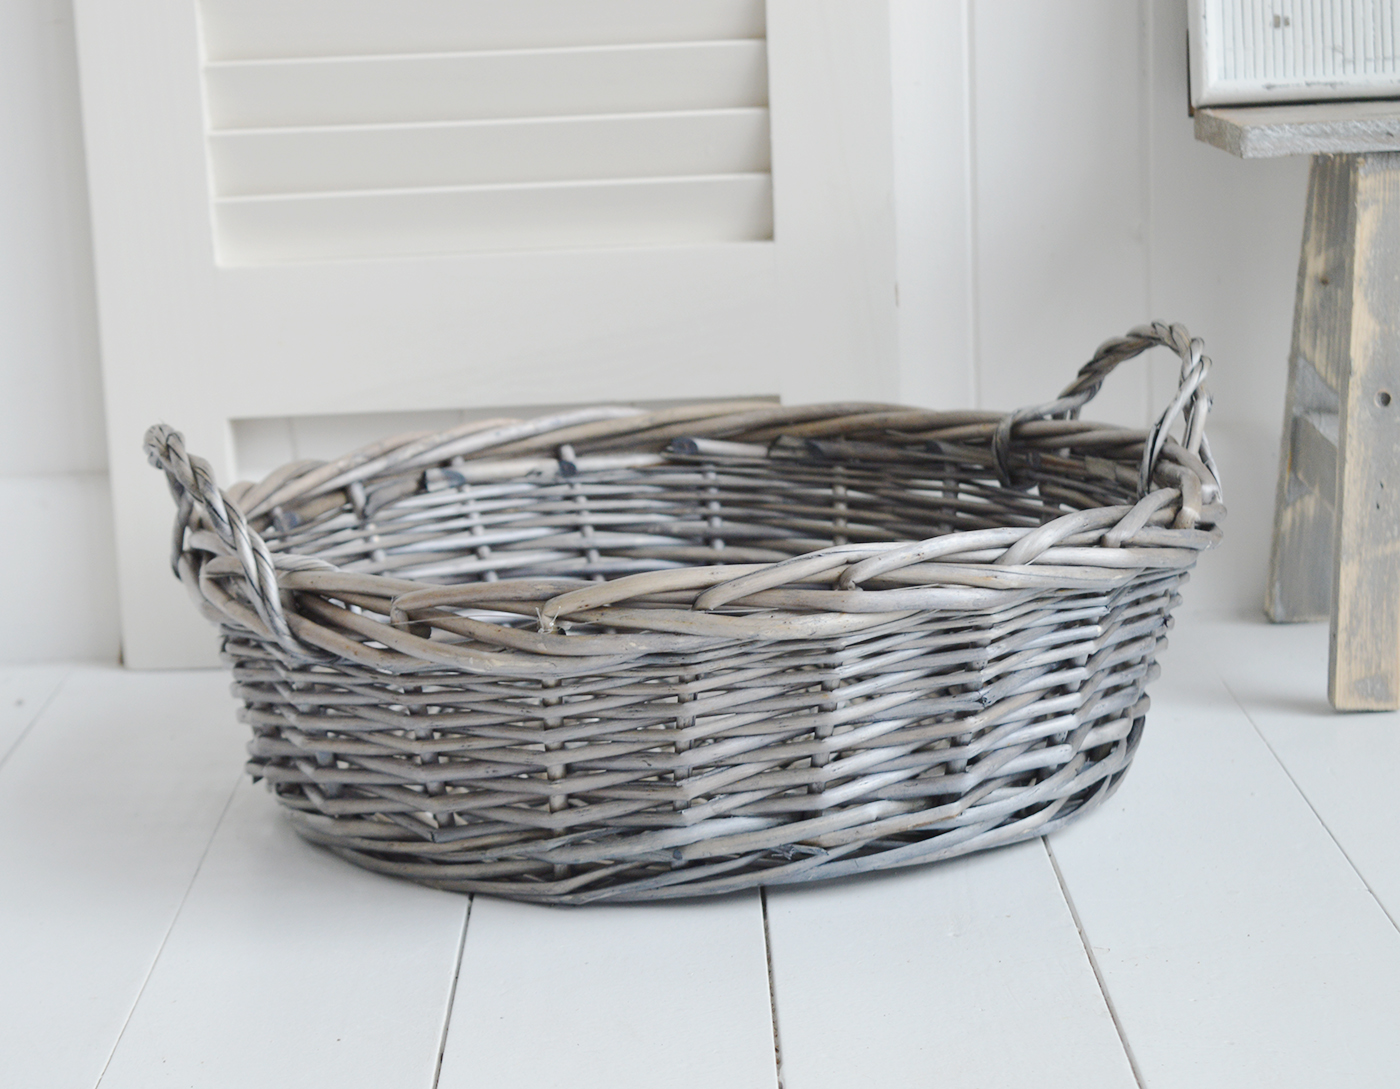 Harrow  large display tray basket from The White Lighthouse Furniture. New England, country, coastal, farmhouse city and whie home interiors. Hallway, Bedroom , Bathroom and living room